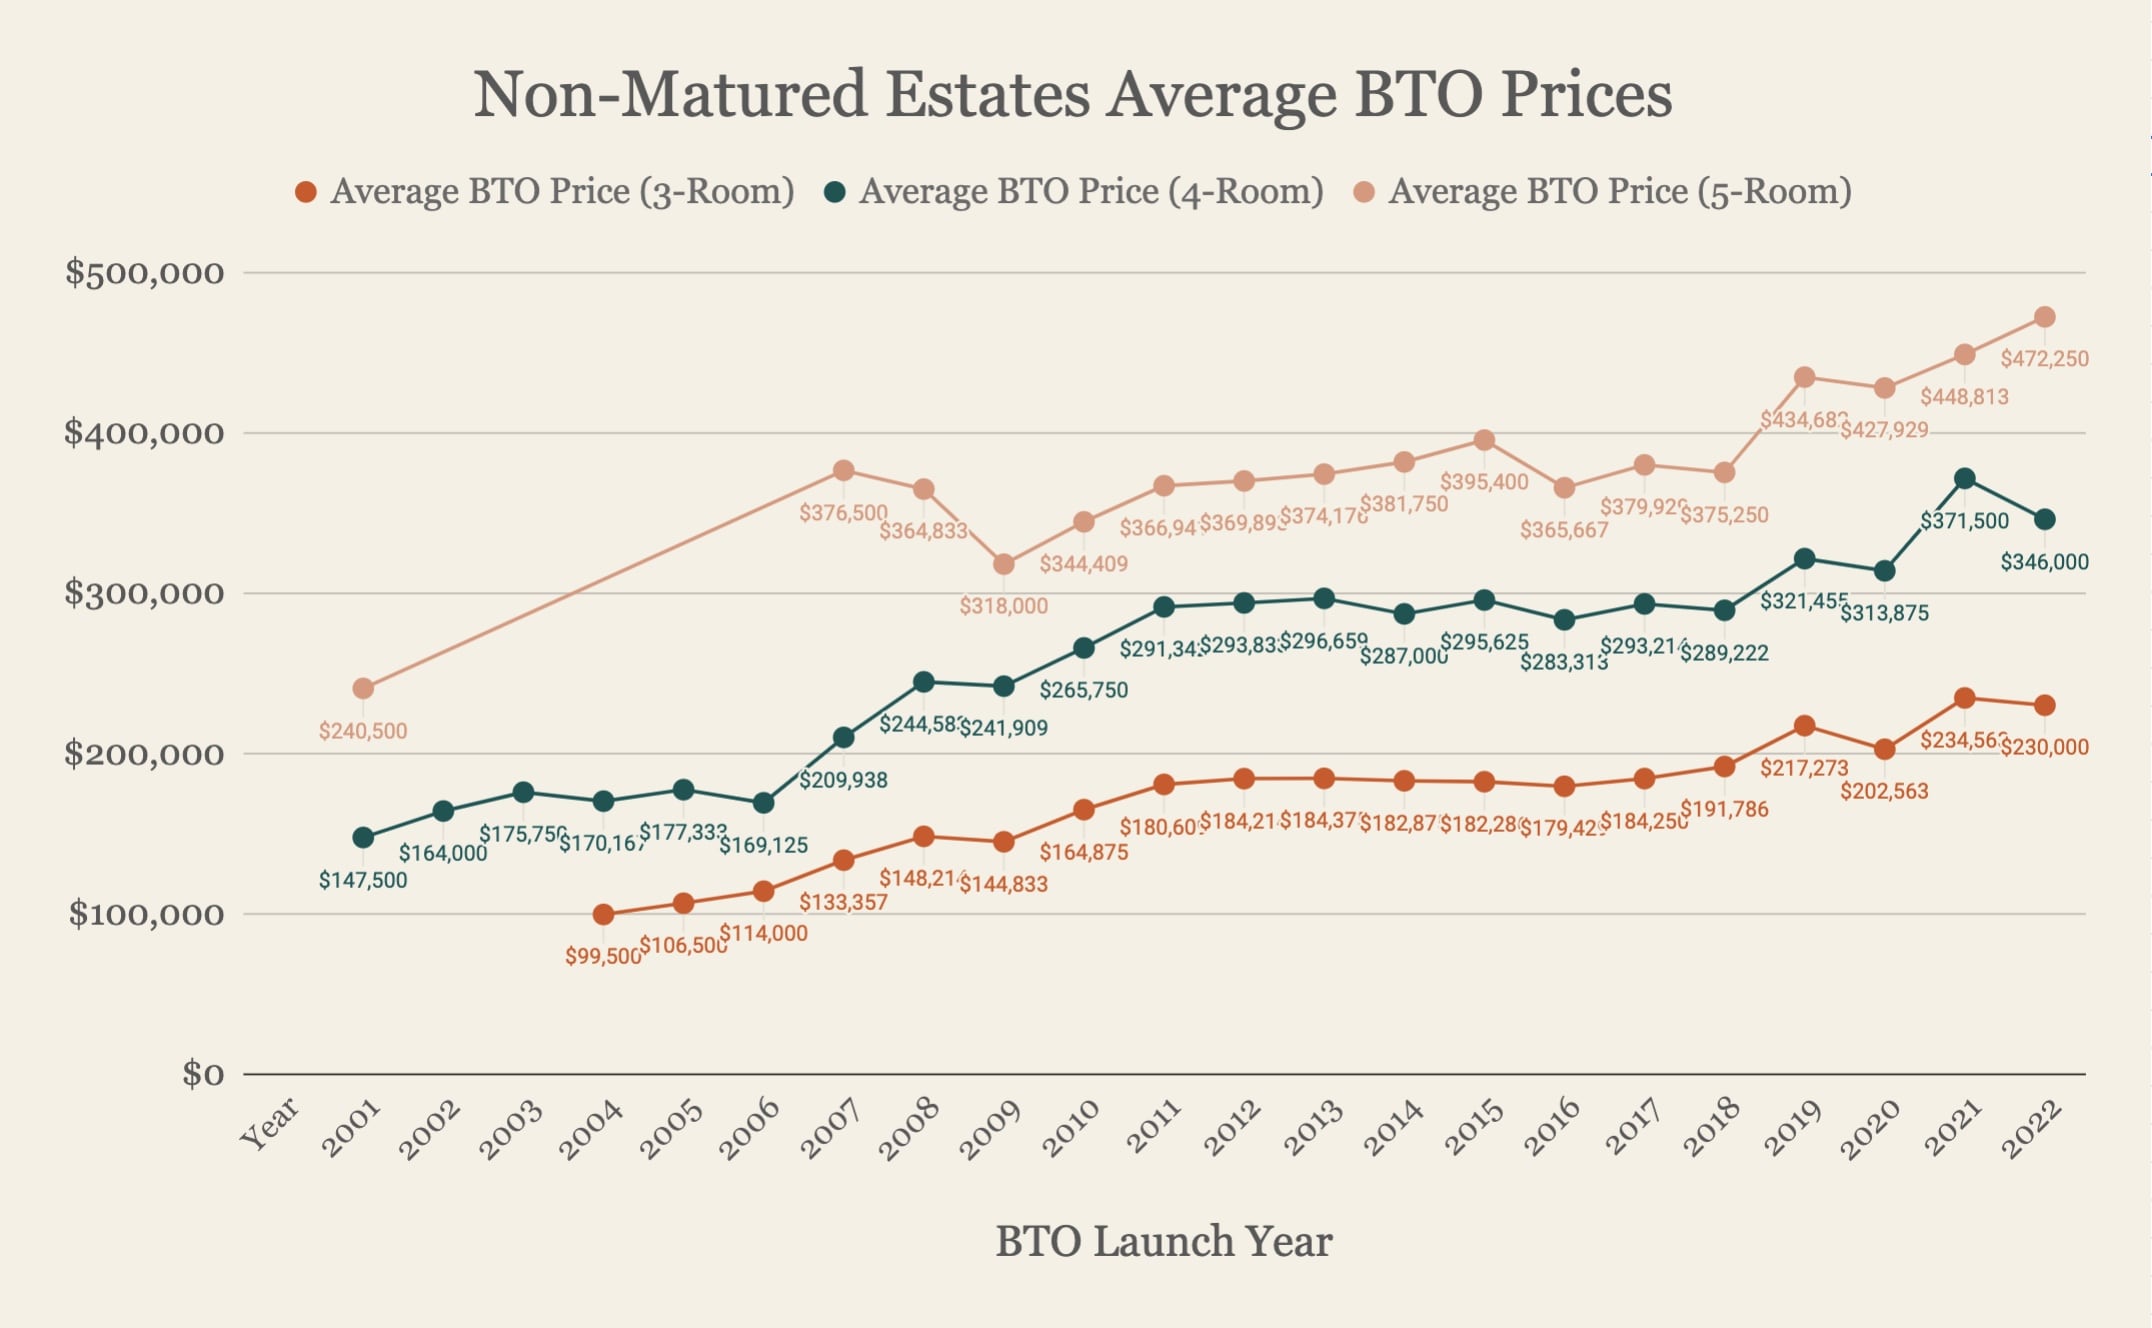 Non Mature BTO Average Prices Over The Years